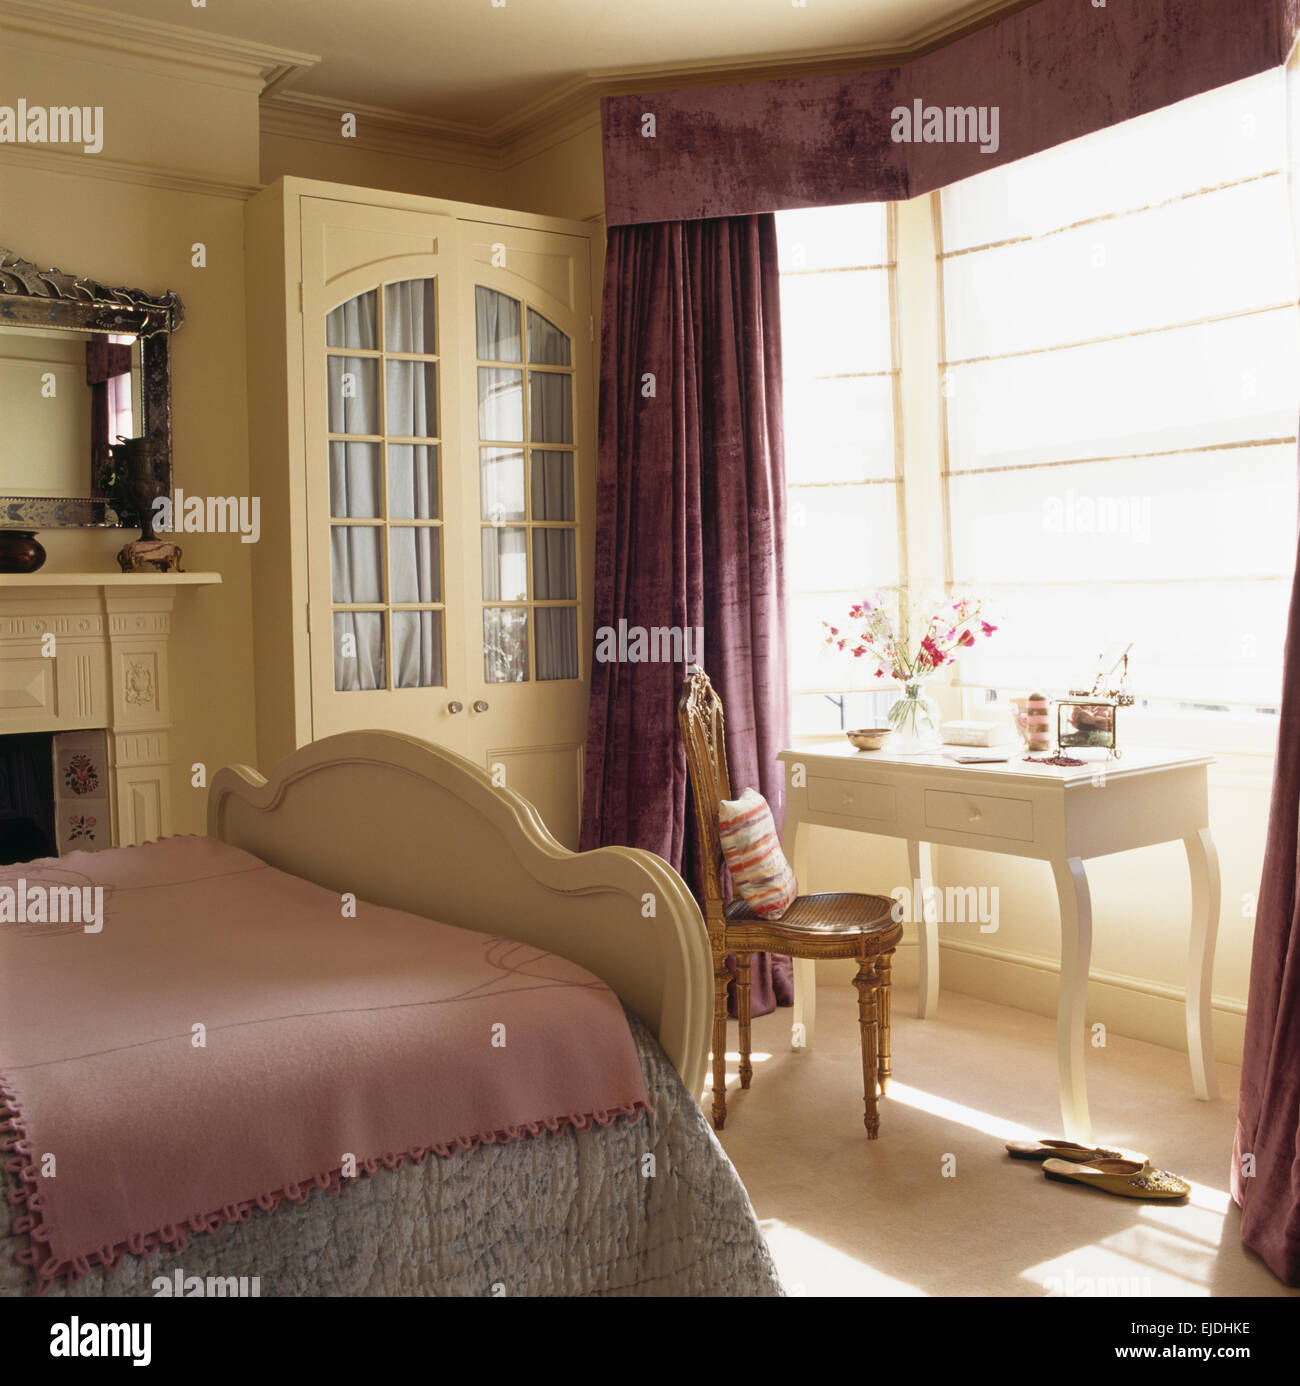 Cream fitted wardrobe with interior drapes in traditional bedroom with purple curtains and fine linen blinds on the window Stock Photo